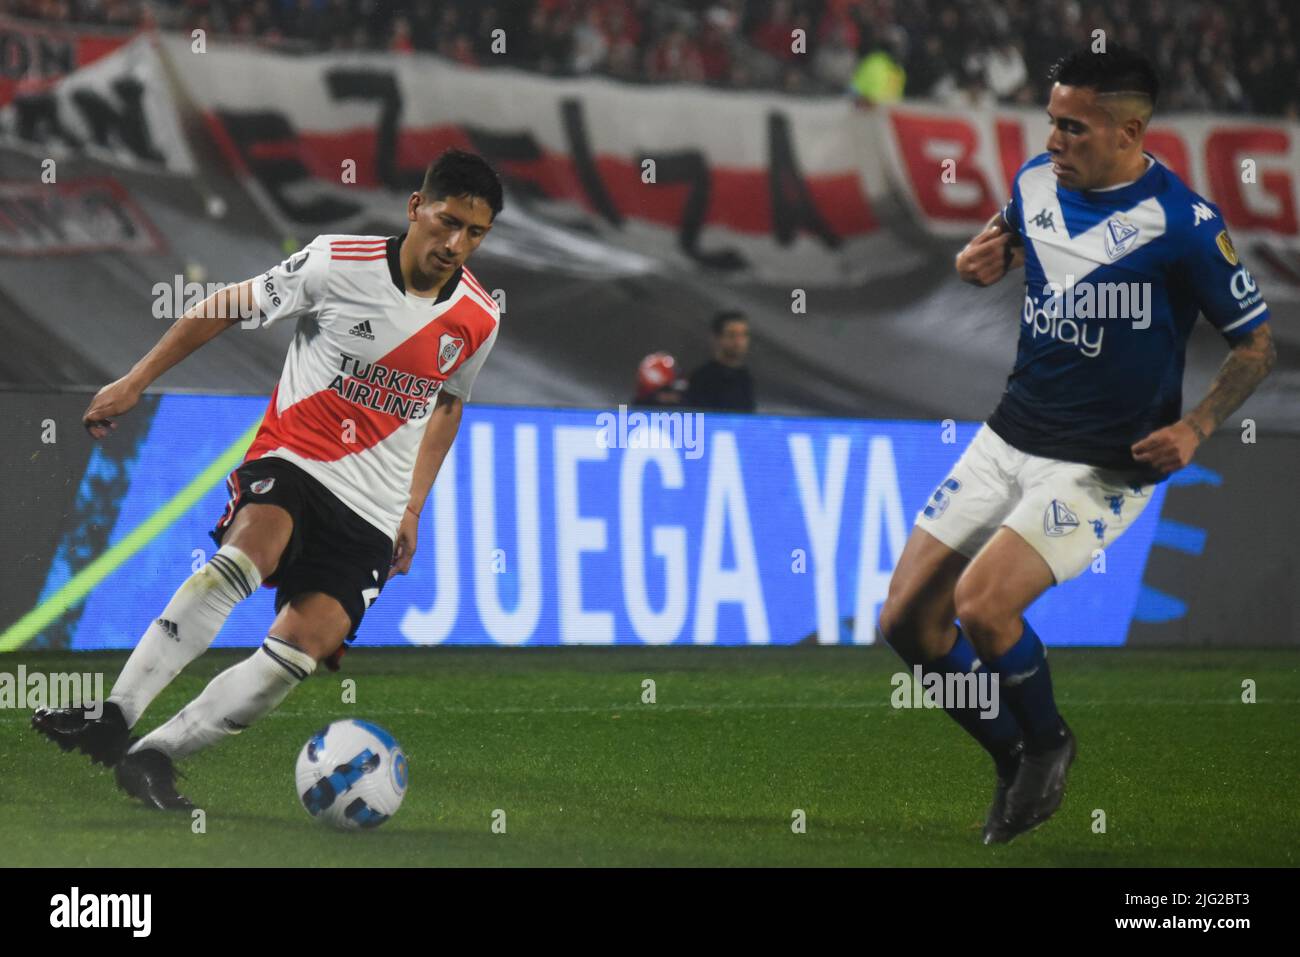 Buenos Aires, Argentina. 06th July, 2022. Match between River Plate and Velez Sarsfield valid for the second leg of the round of 16 of the Copa Libertadores de América 2022 played at Estadio Monumental, Buenos Aires, Argentina on July 6, 2022. Credit: Gabriel Sotelo/FotoArena/Alamy Live News Stock Photo